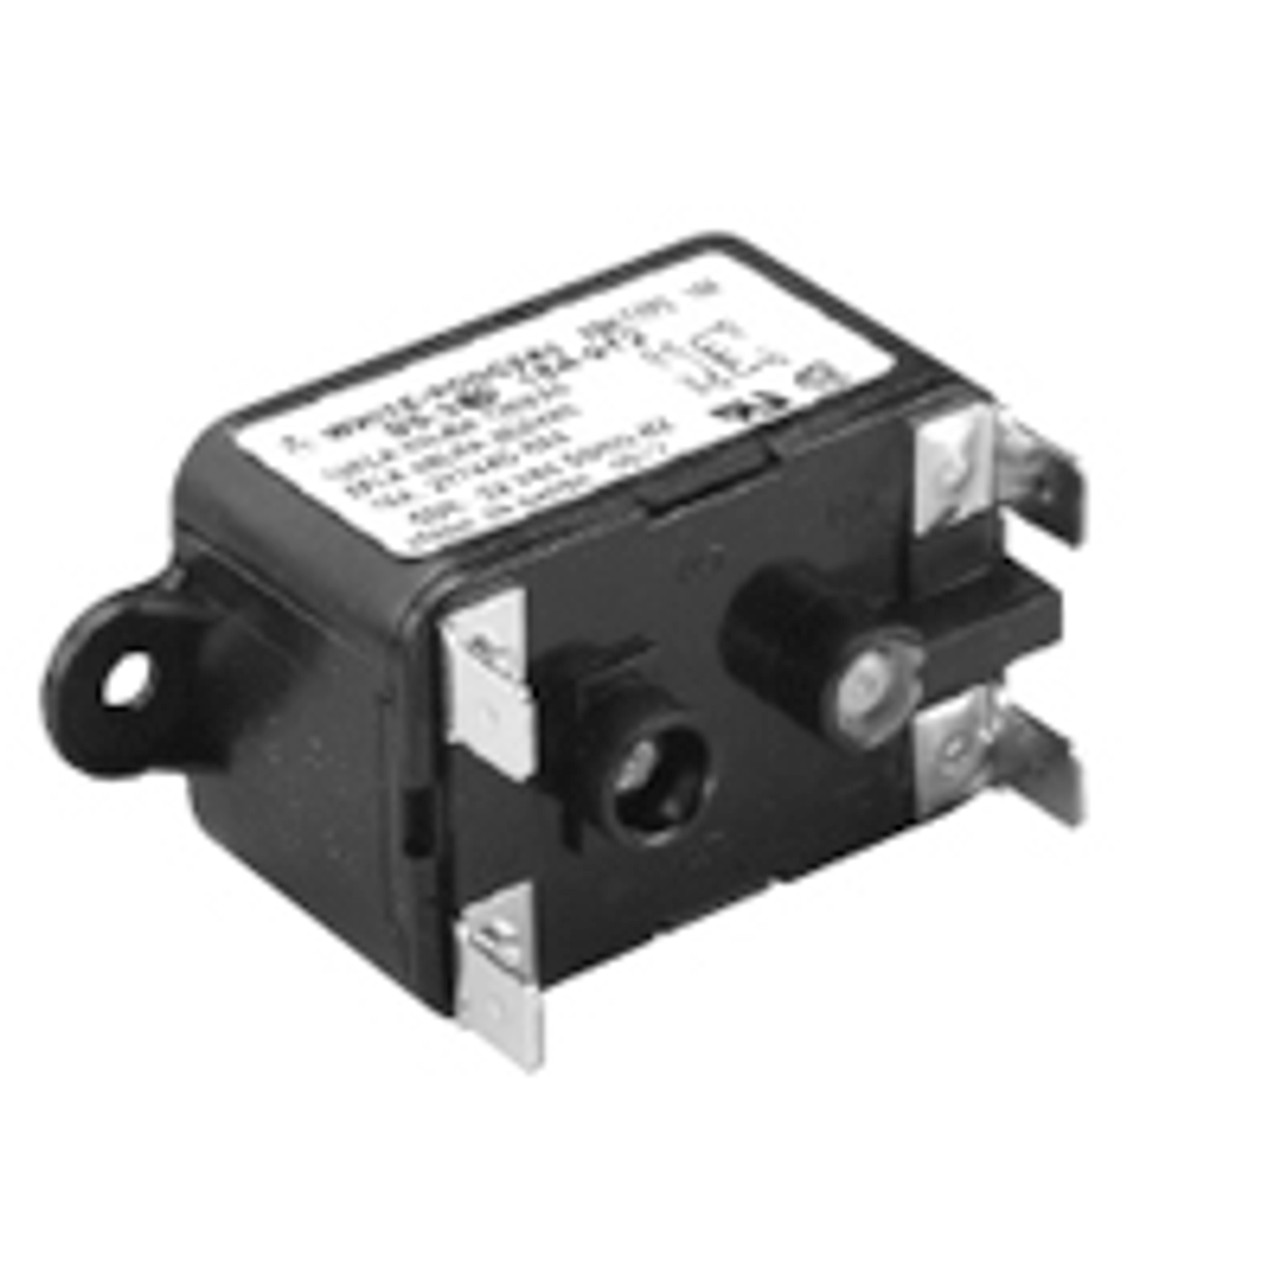 Stancor / White Rodgers 184-912 Power Relays